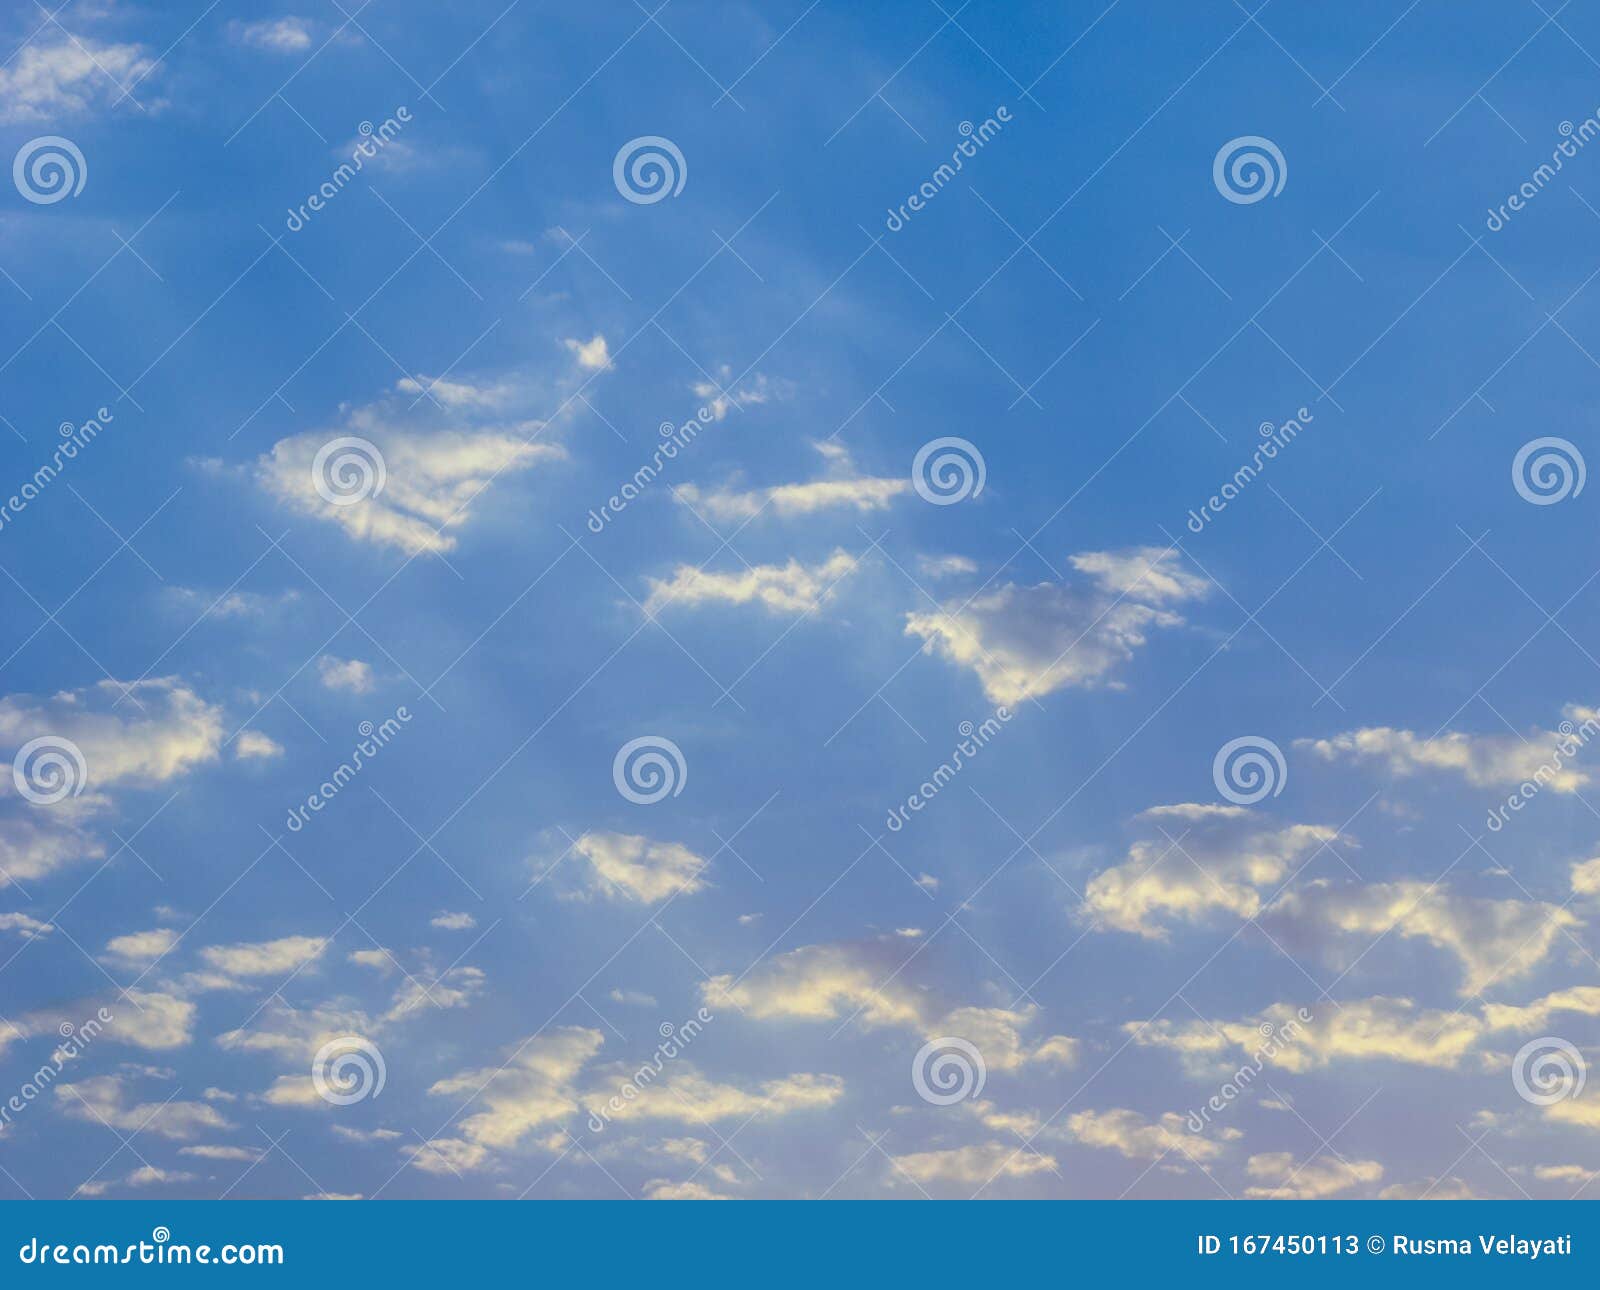 Blue Sky With White Cloud Patches Stock Image Image Of Nature